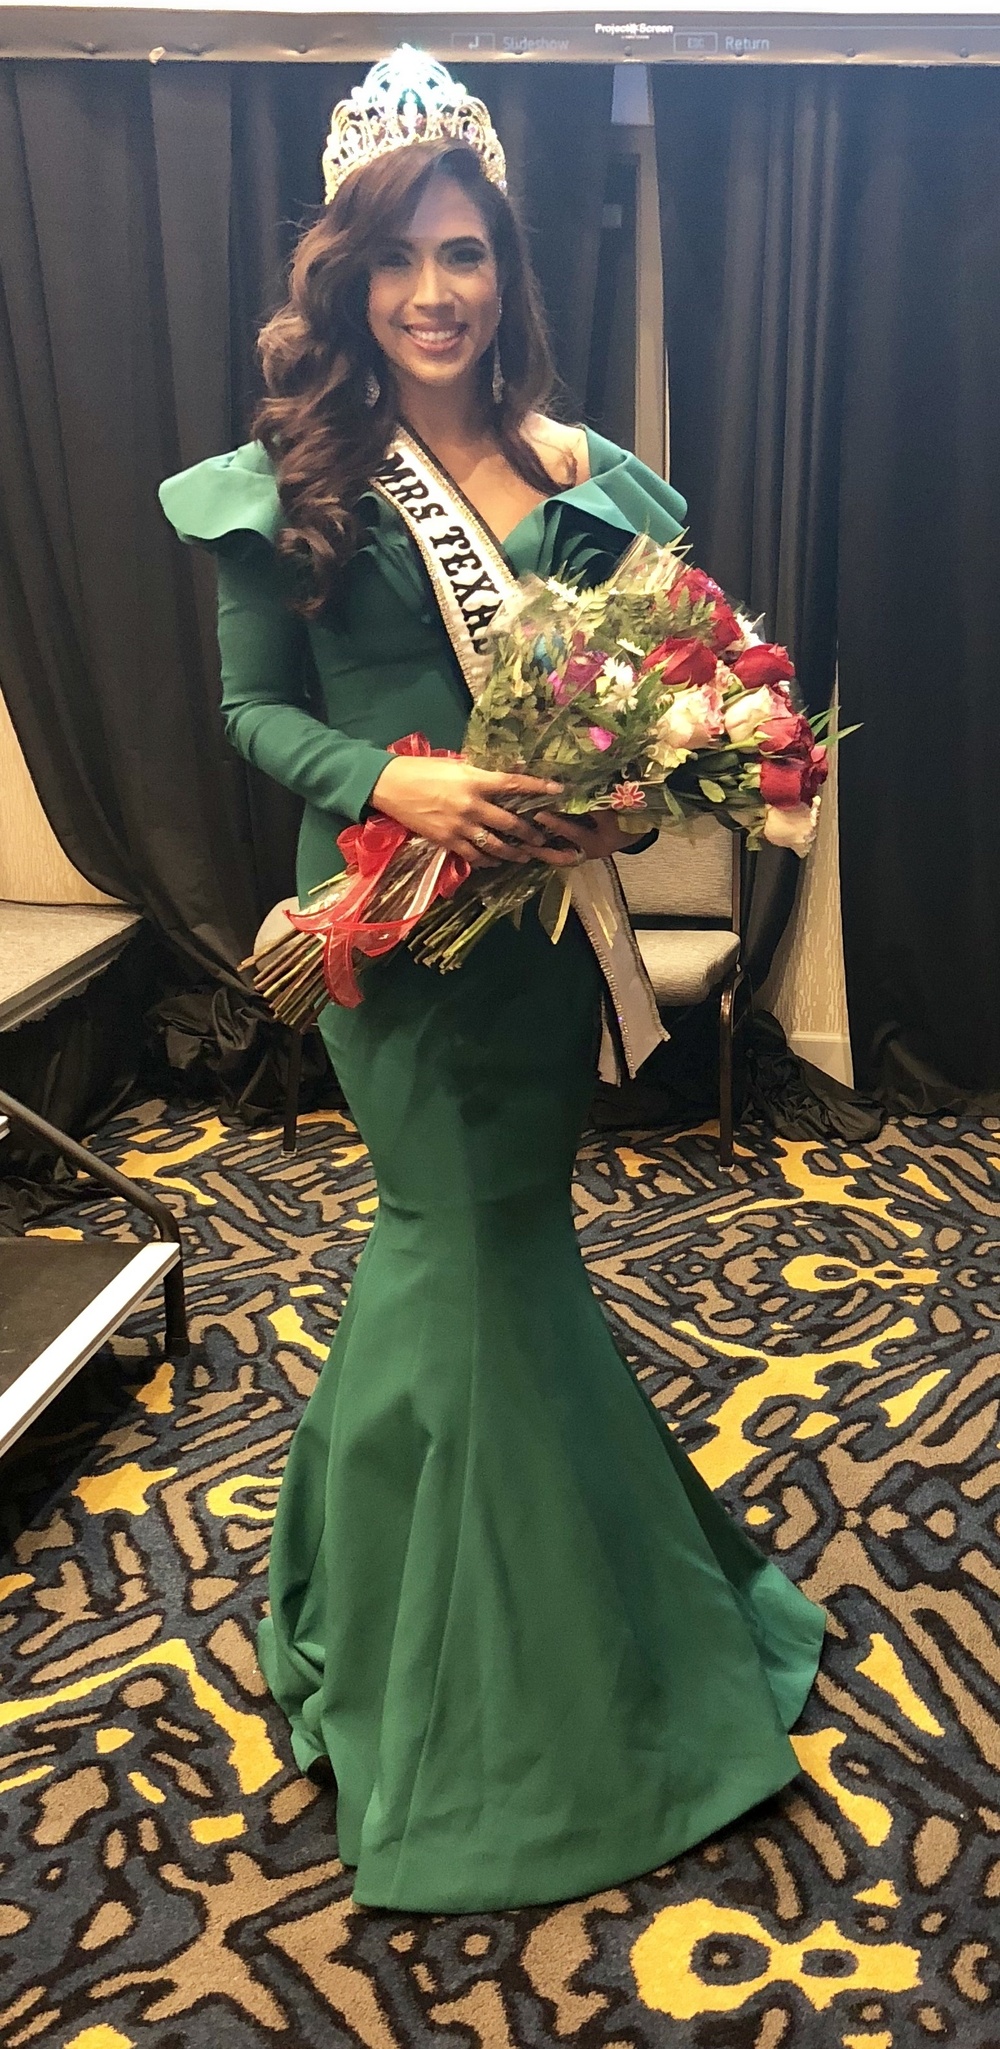 Texas National Guard Soldier wins Beauty Pageant